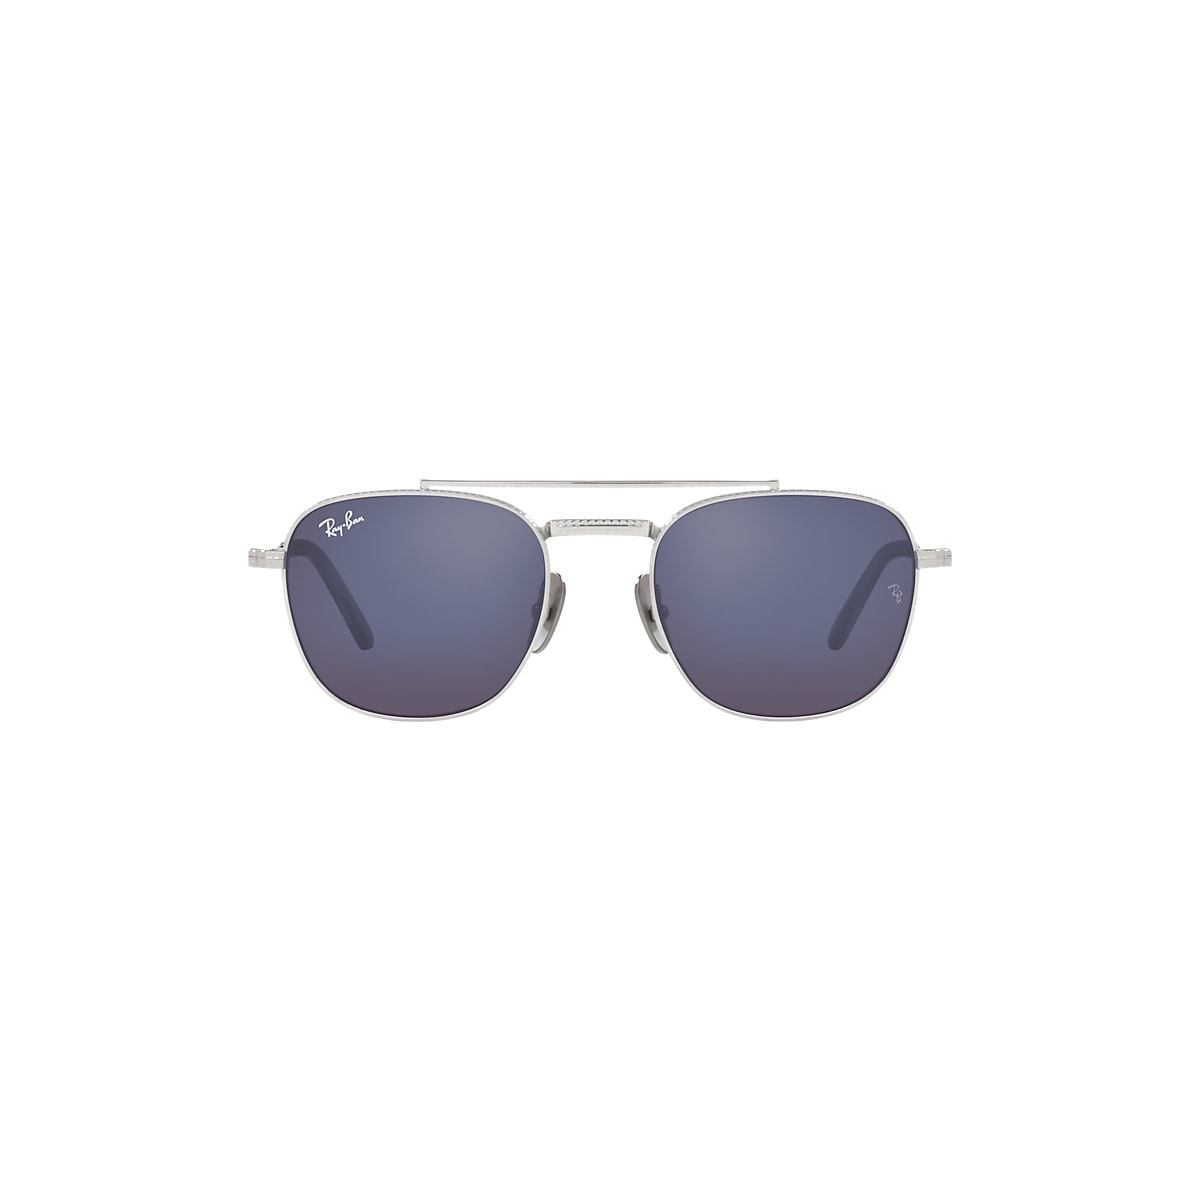 FRANK II TITANIUM Sunglasses in Silver and Grey Blue - Ray-Ban